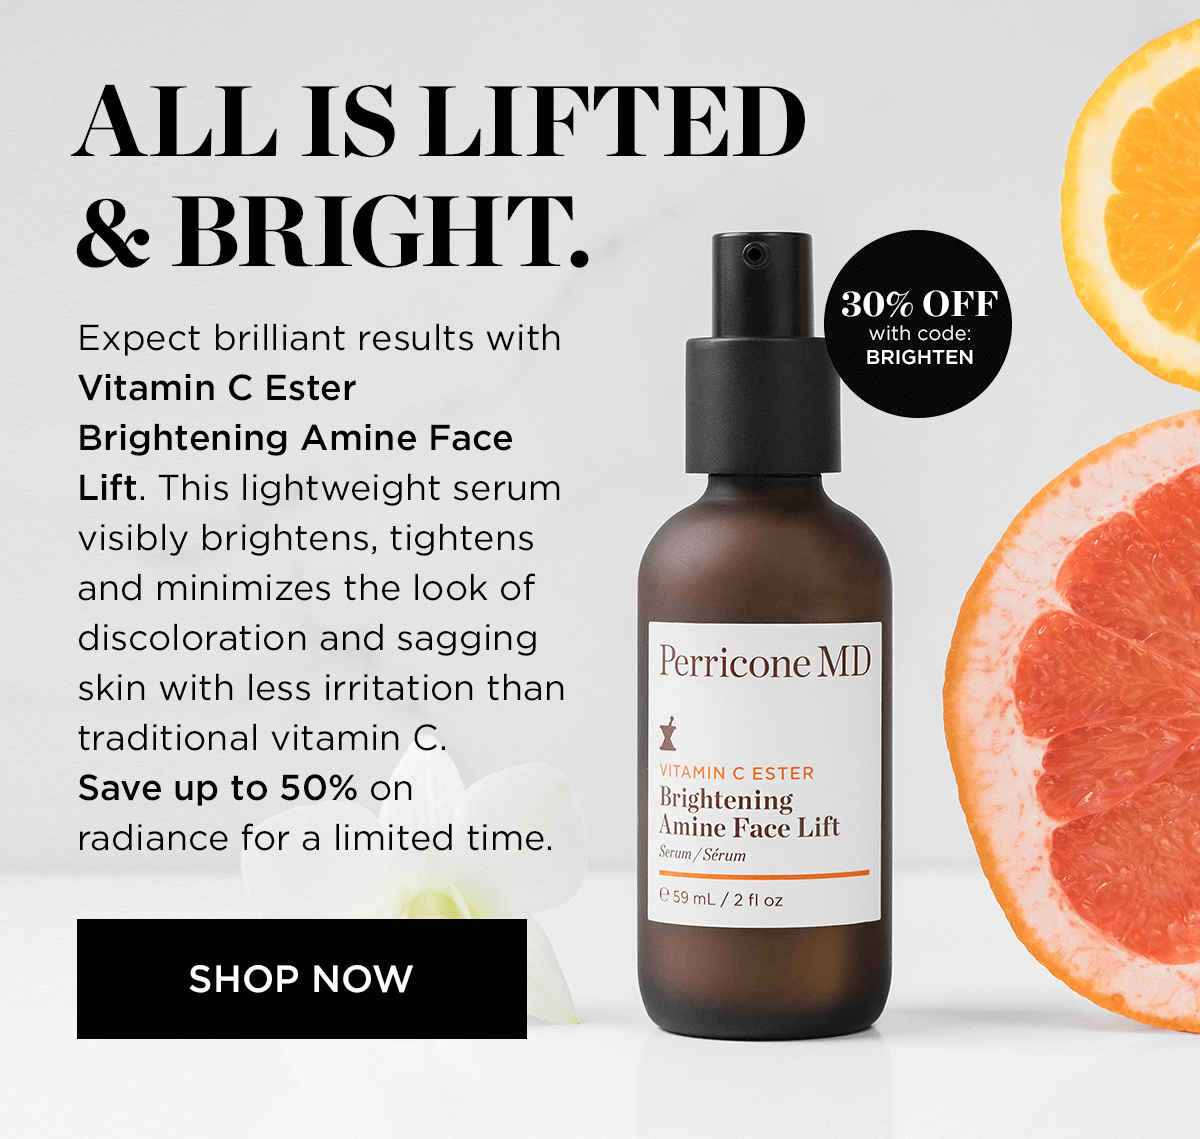 ALLIS LIFTED BRIGHT. 30% OFF illi I ith code: Expect brilliant results with bl Vitamin C Ester Brightening Amine Face Lift. This lightweight serum visibly brightens, tightens and minimizes the look of discoloration and sagging skin with less irritation than traditional vitamin C. Save up to 50% on radiance for a limited time. SHOP NOW Perricone MD MIN C ESTER Brightening Amine Face Lift Serum Srum 59mL 2 fl oz 